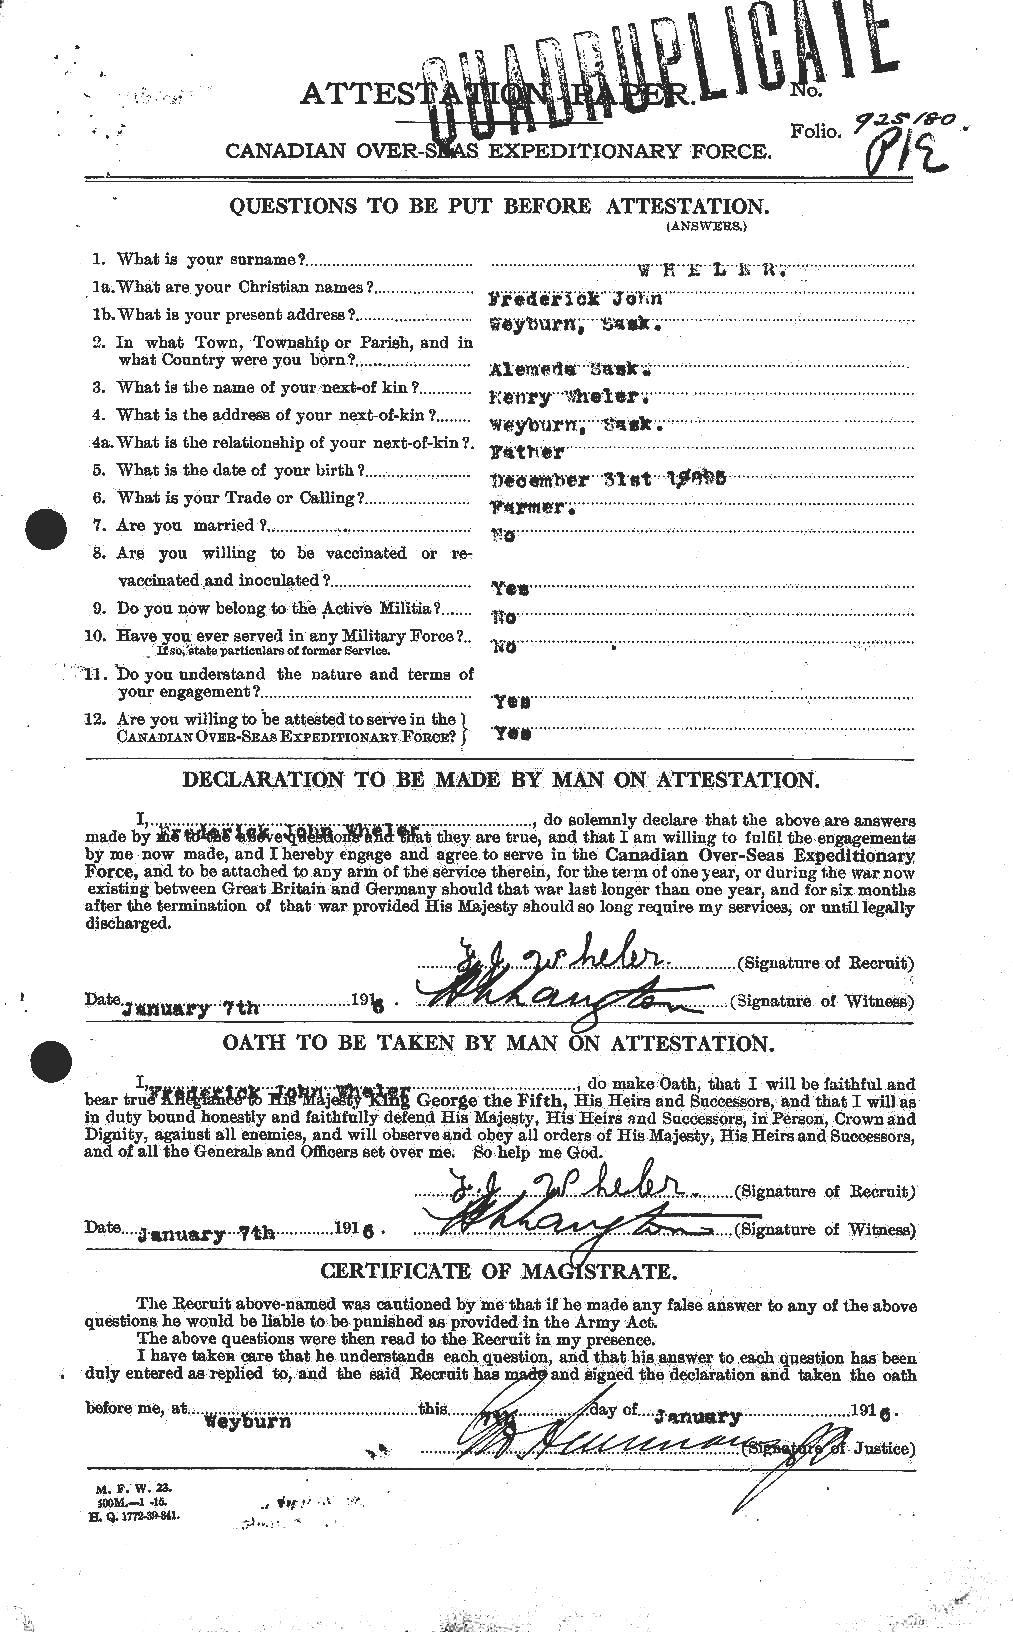 Personnel Records of the First World War - CEF 667606a